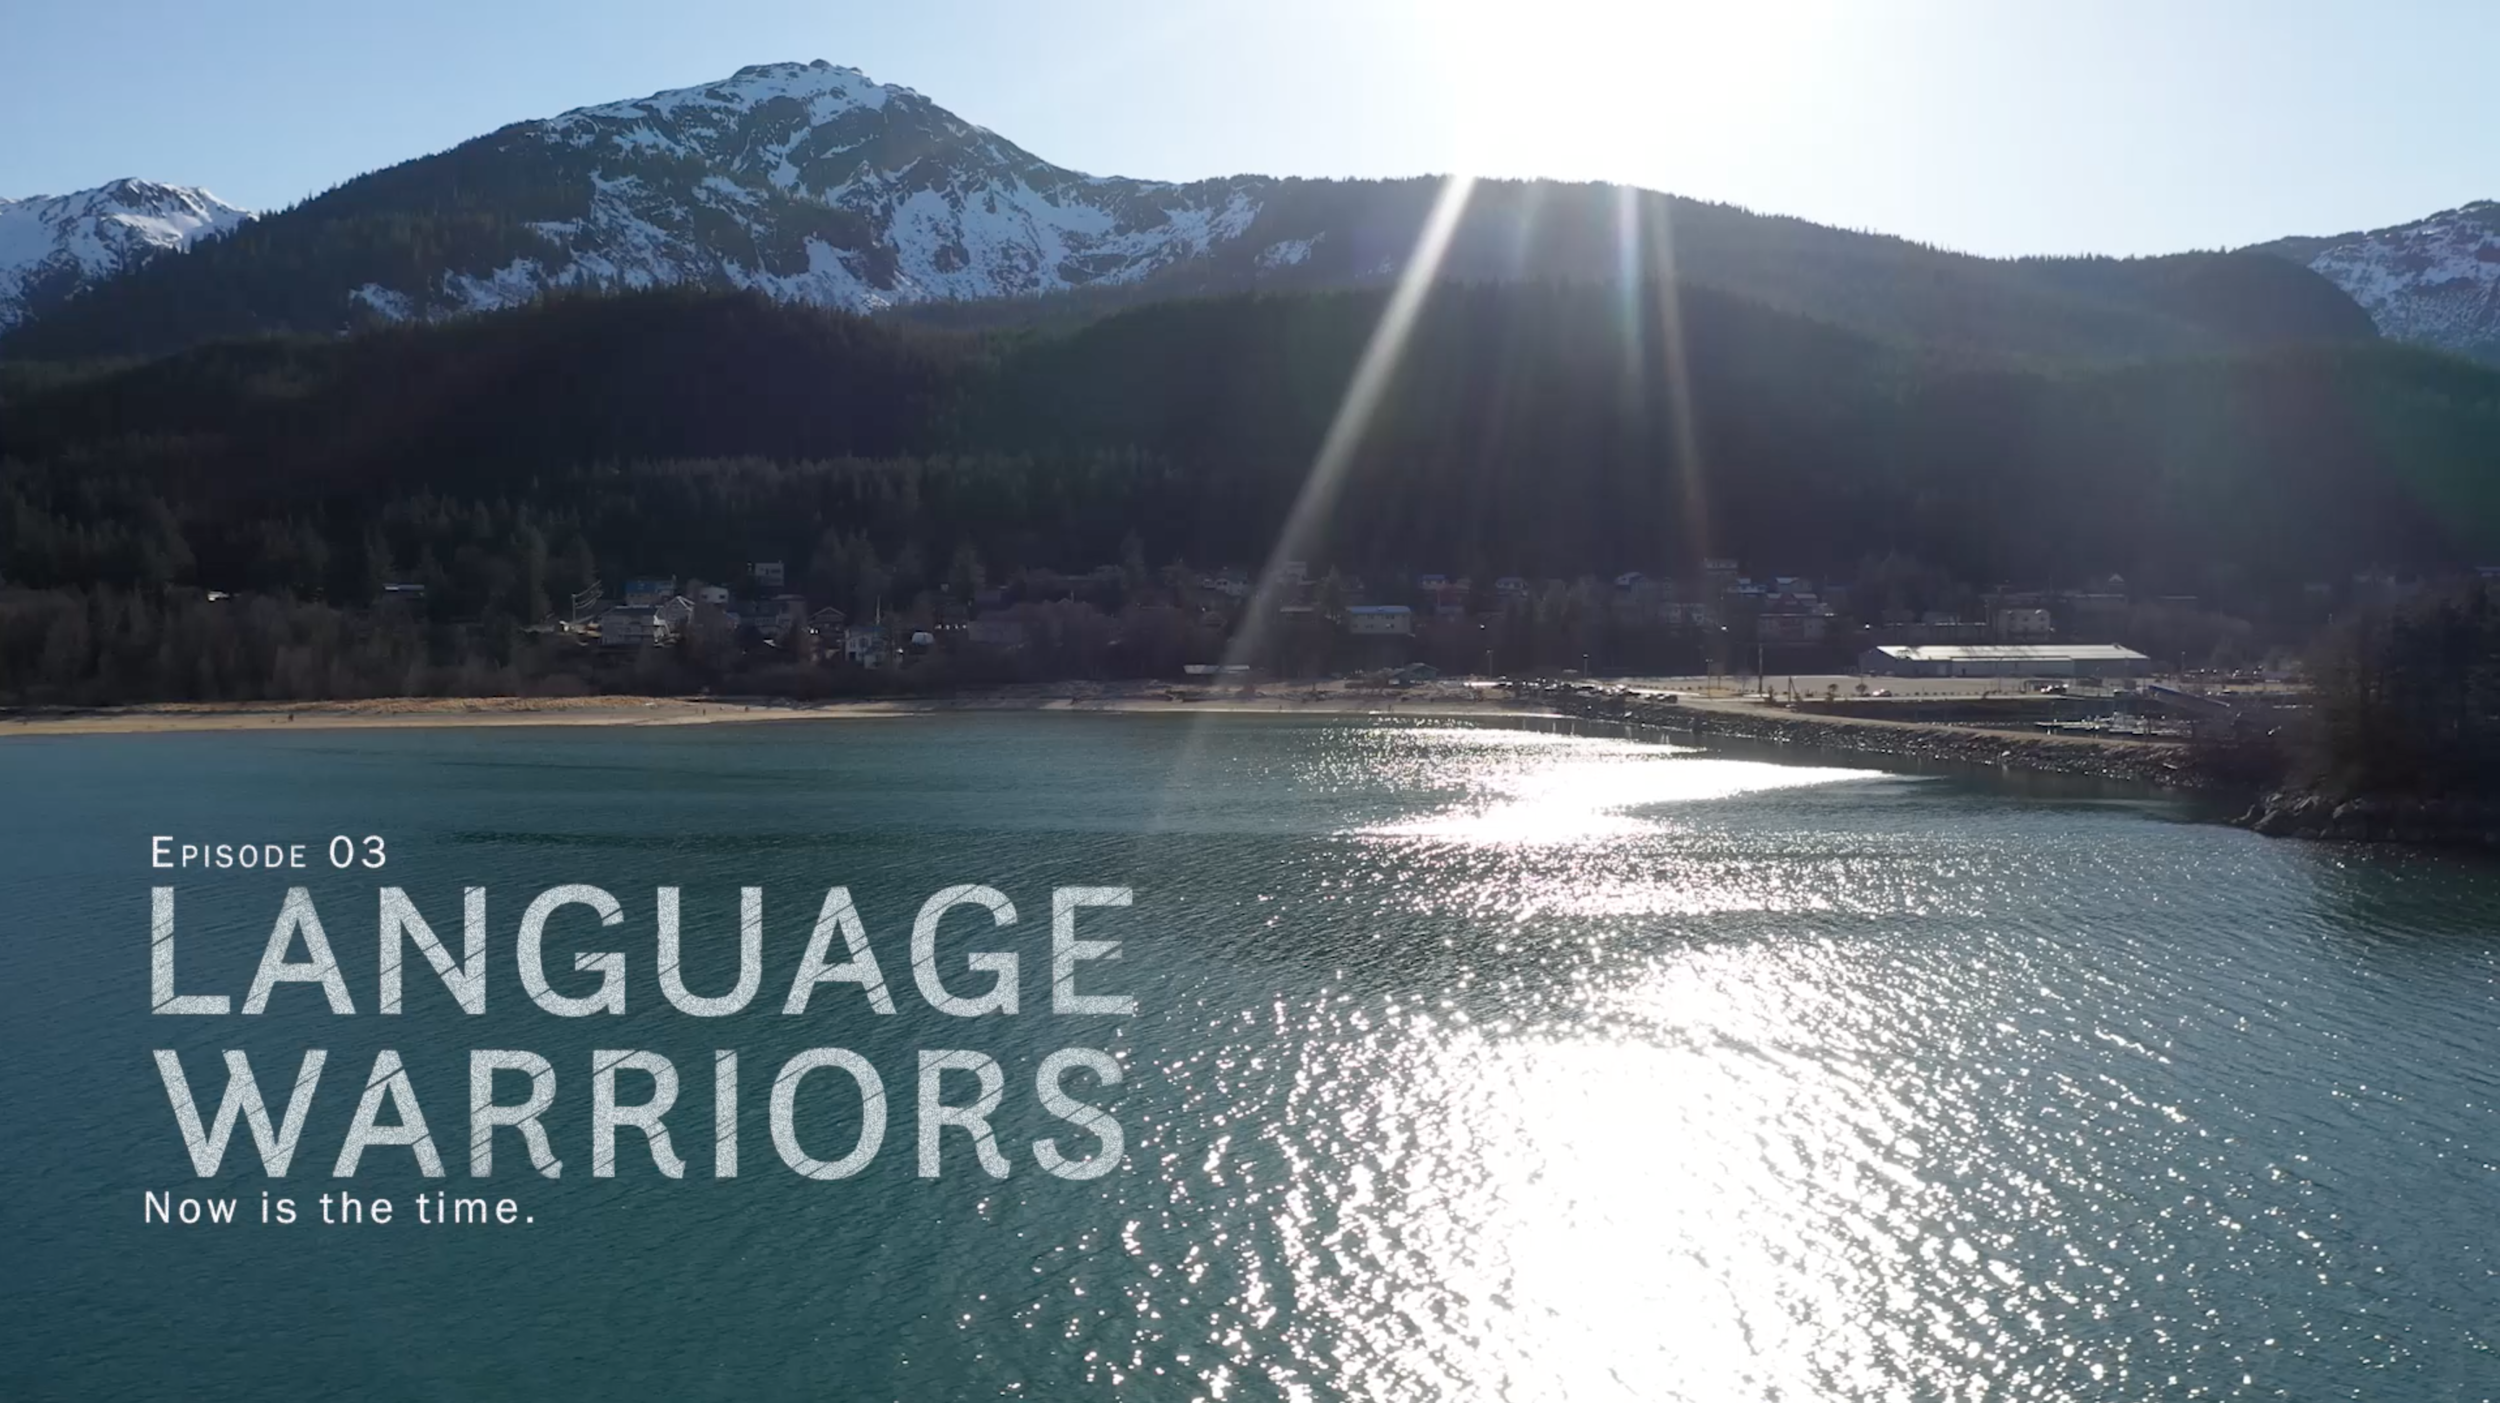 The 3rd movie in our series, LANGUAGE WARRIORS tells the story of 3 languages on the brink of extinction and the brave and determined people working to save them for future generations. Watch on www.sealaska.com